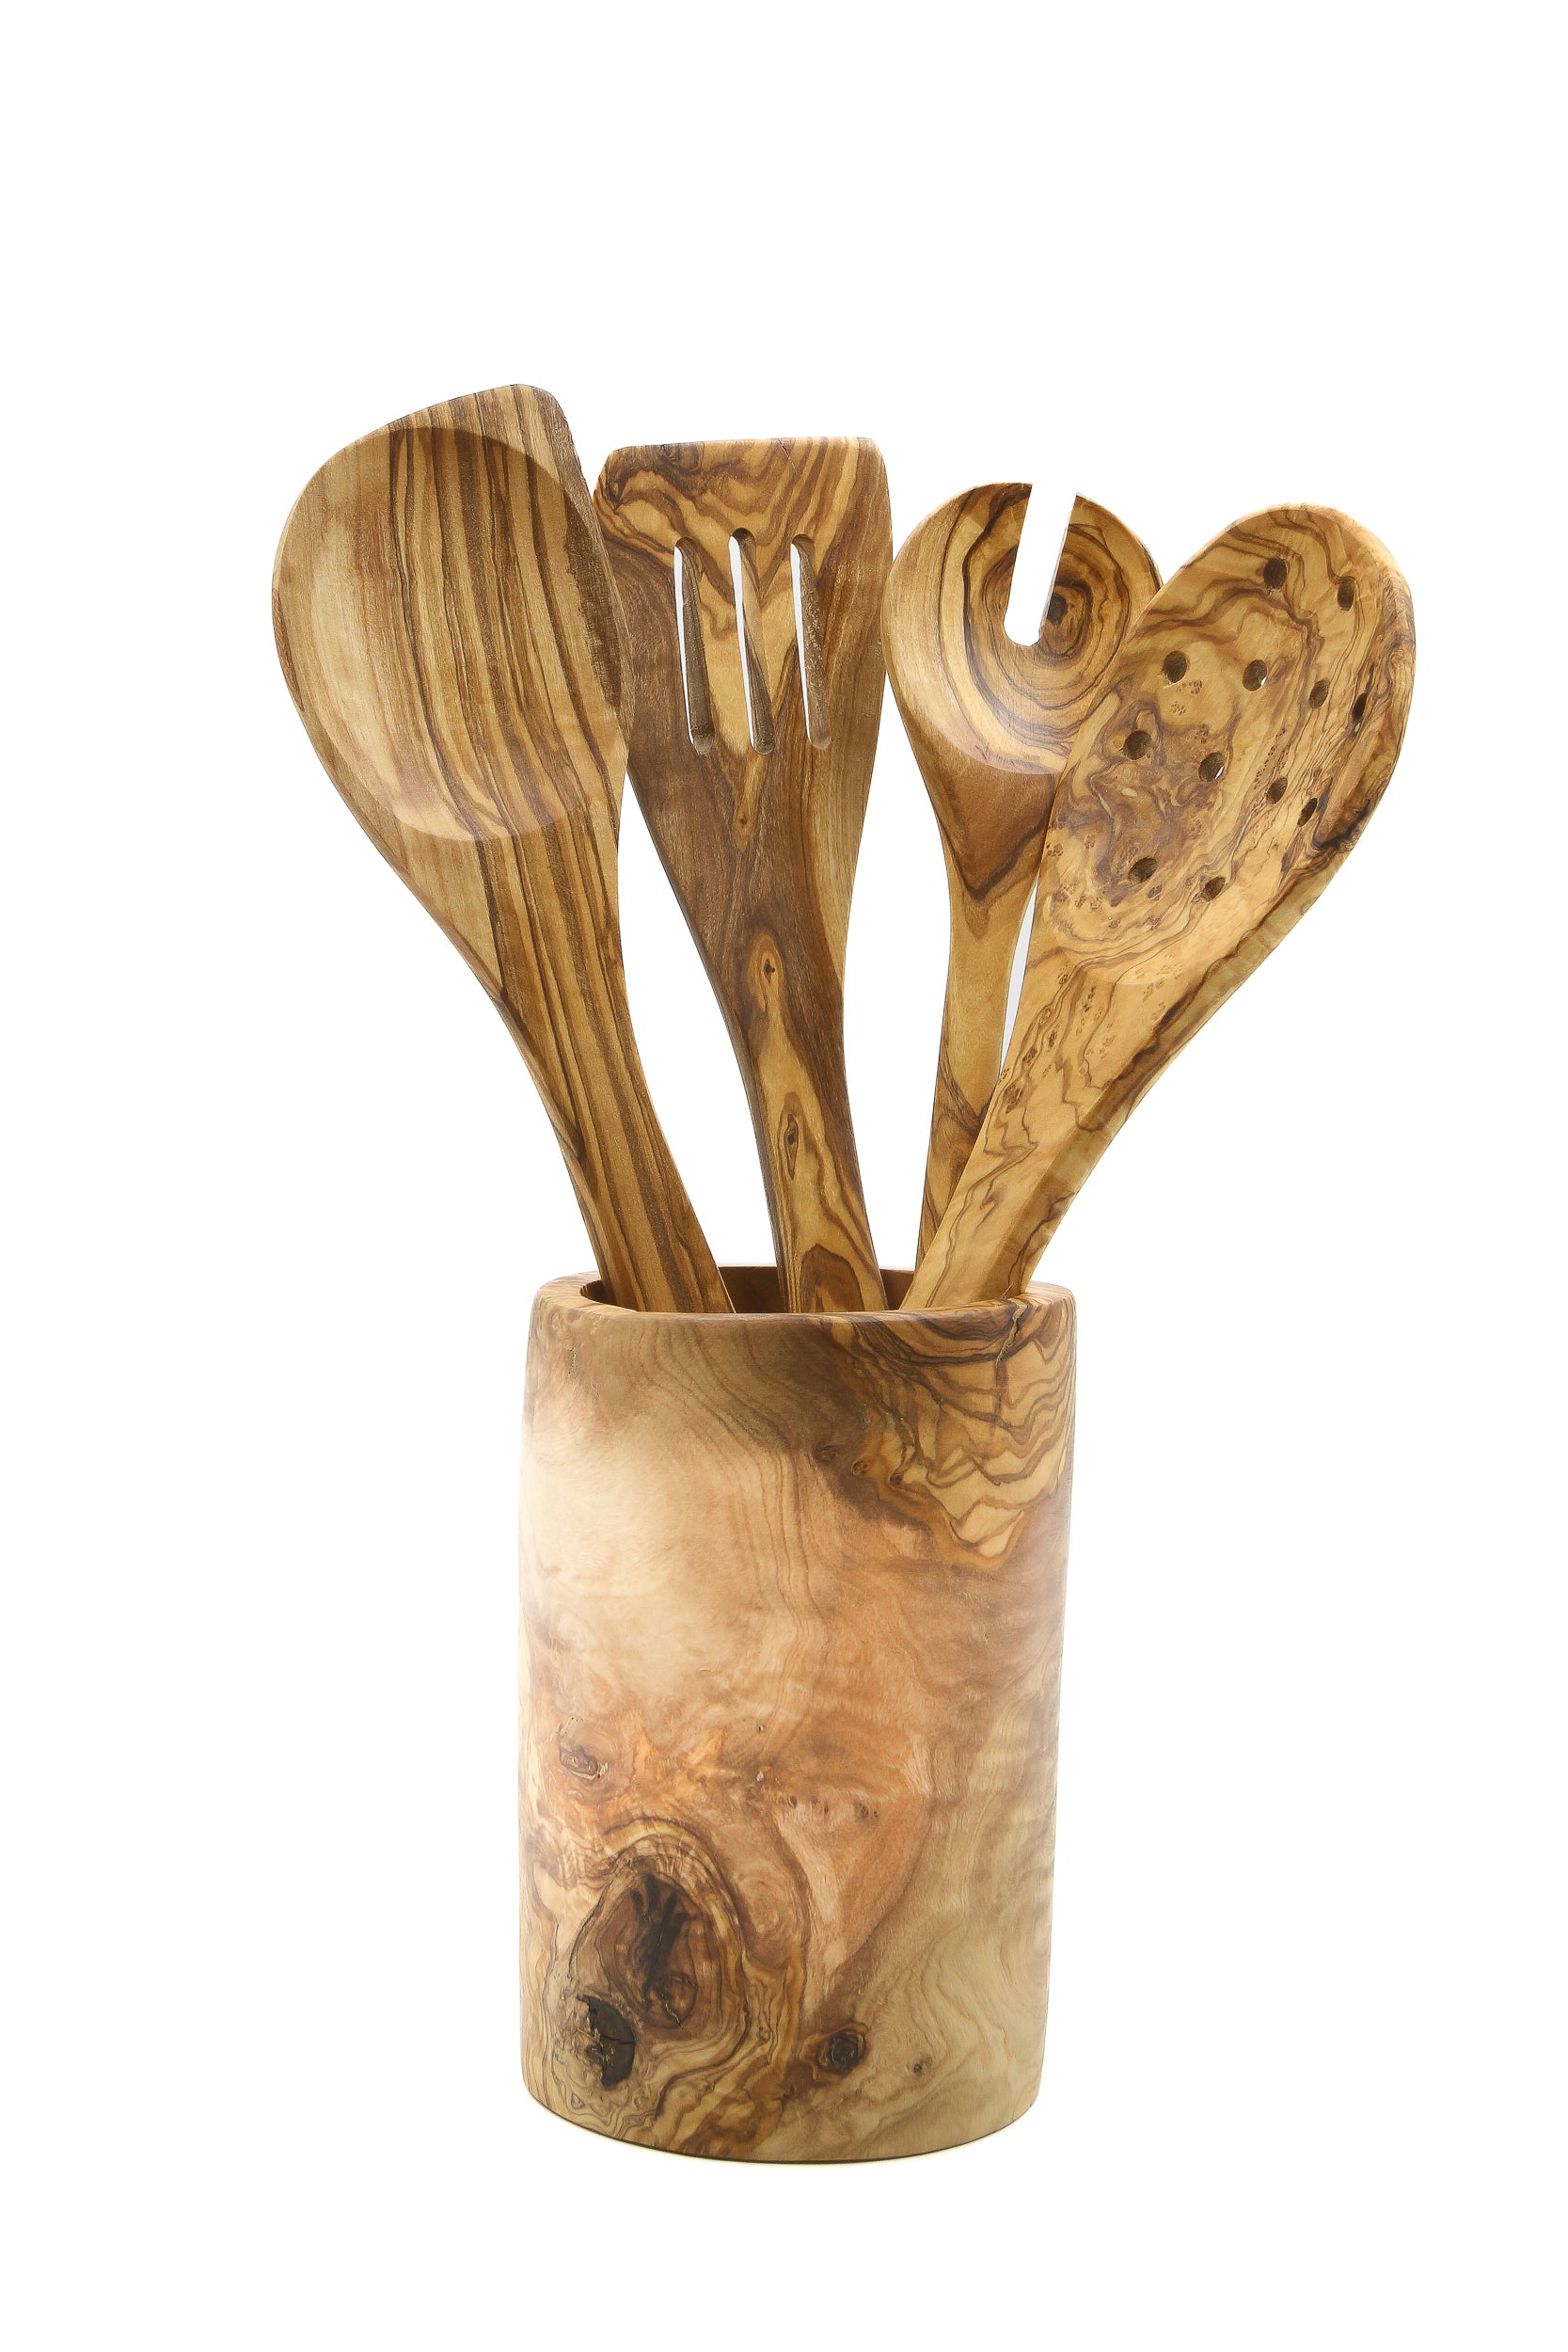 A stylish and sustainable kitchenware set made from beautiful olive wood